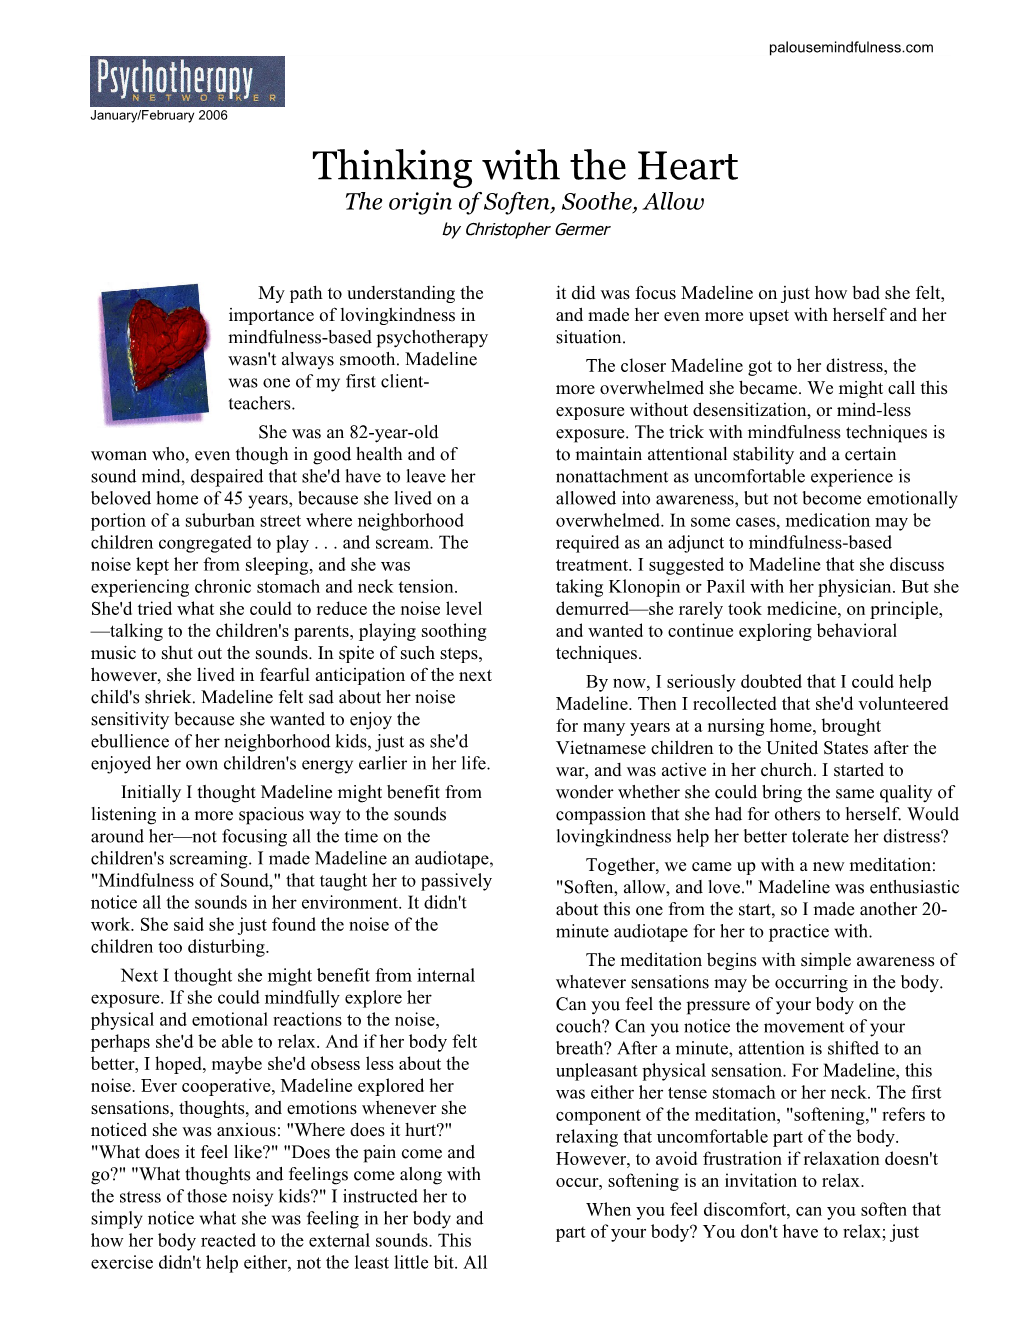 Thinking with the Heart